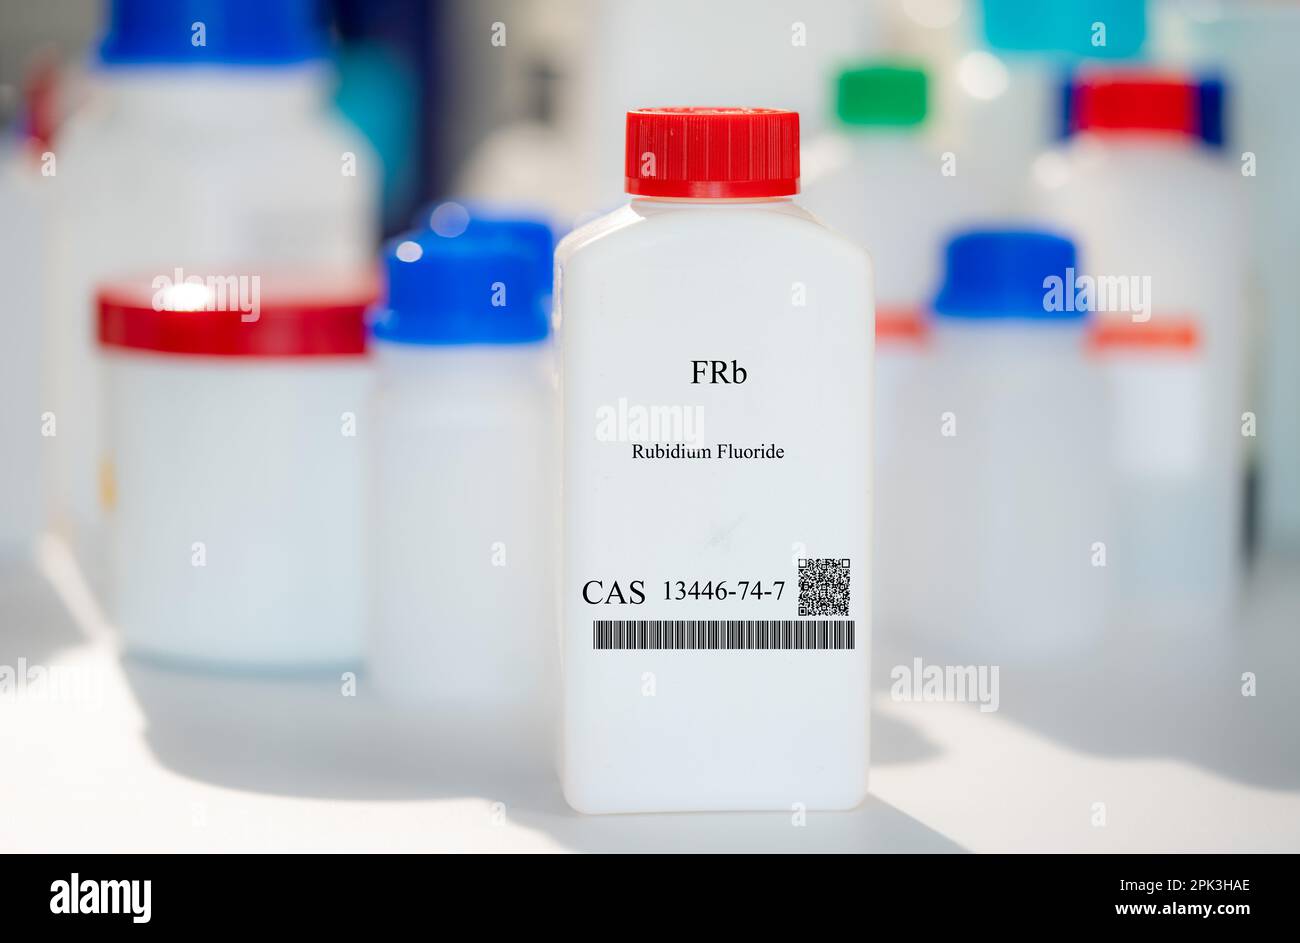 FRb rubidium fluoride CAS 13446-74-7 chemical substance in white plastic laboratory packaging Stock Photo